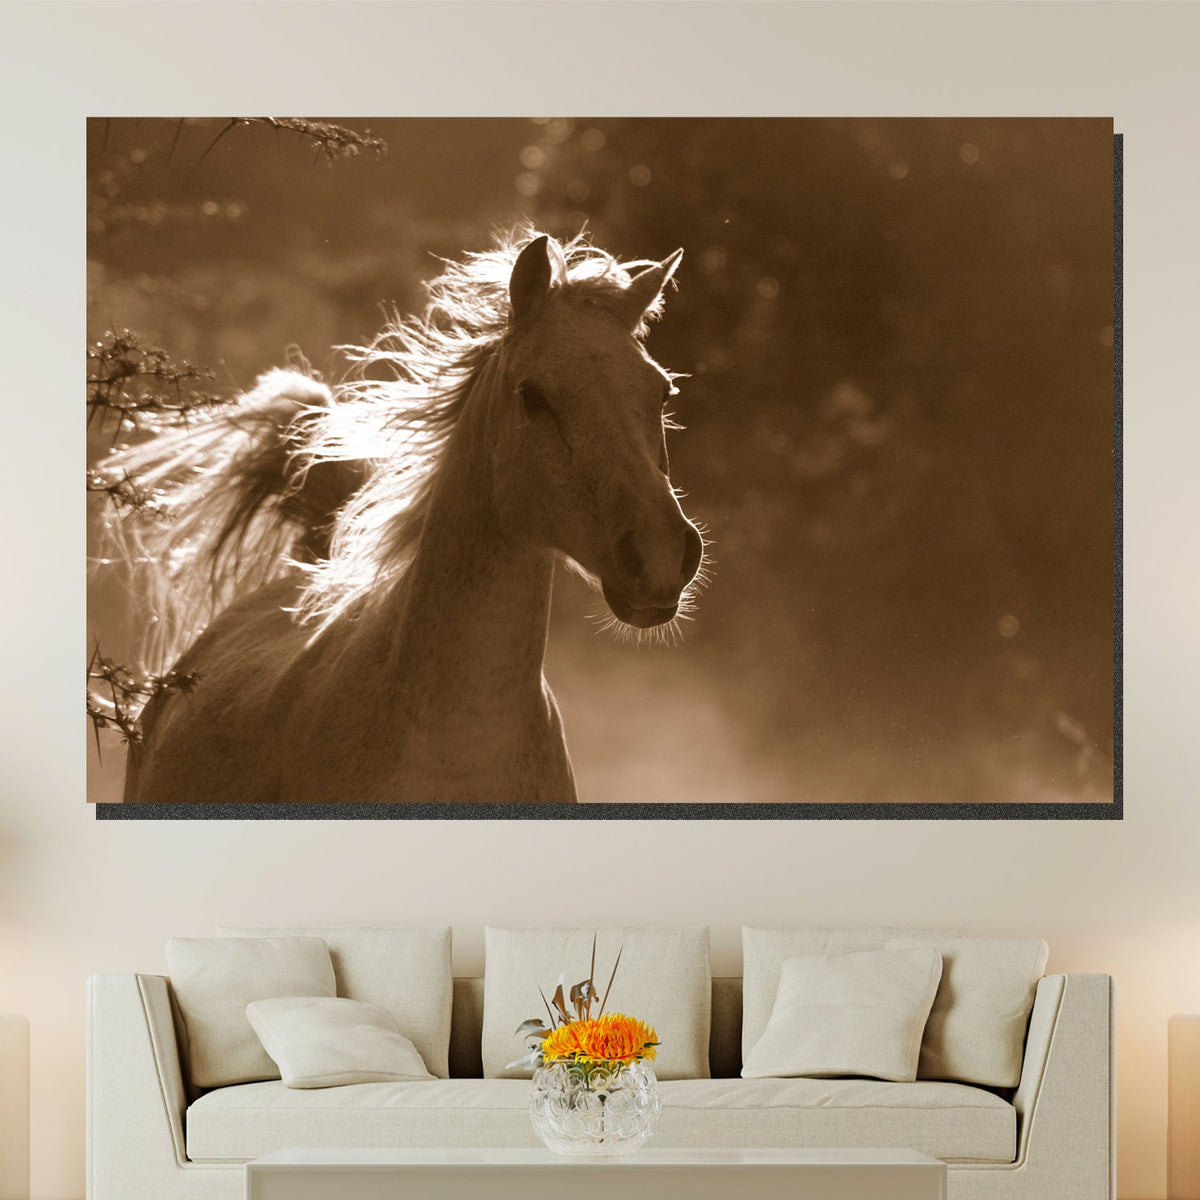 https://cdn.shopify.com/s/files/1/0387/9986/8044/products/WhiteWildHorseCanvasArtprintStretched-1.jpg